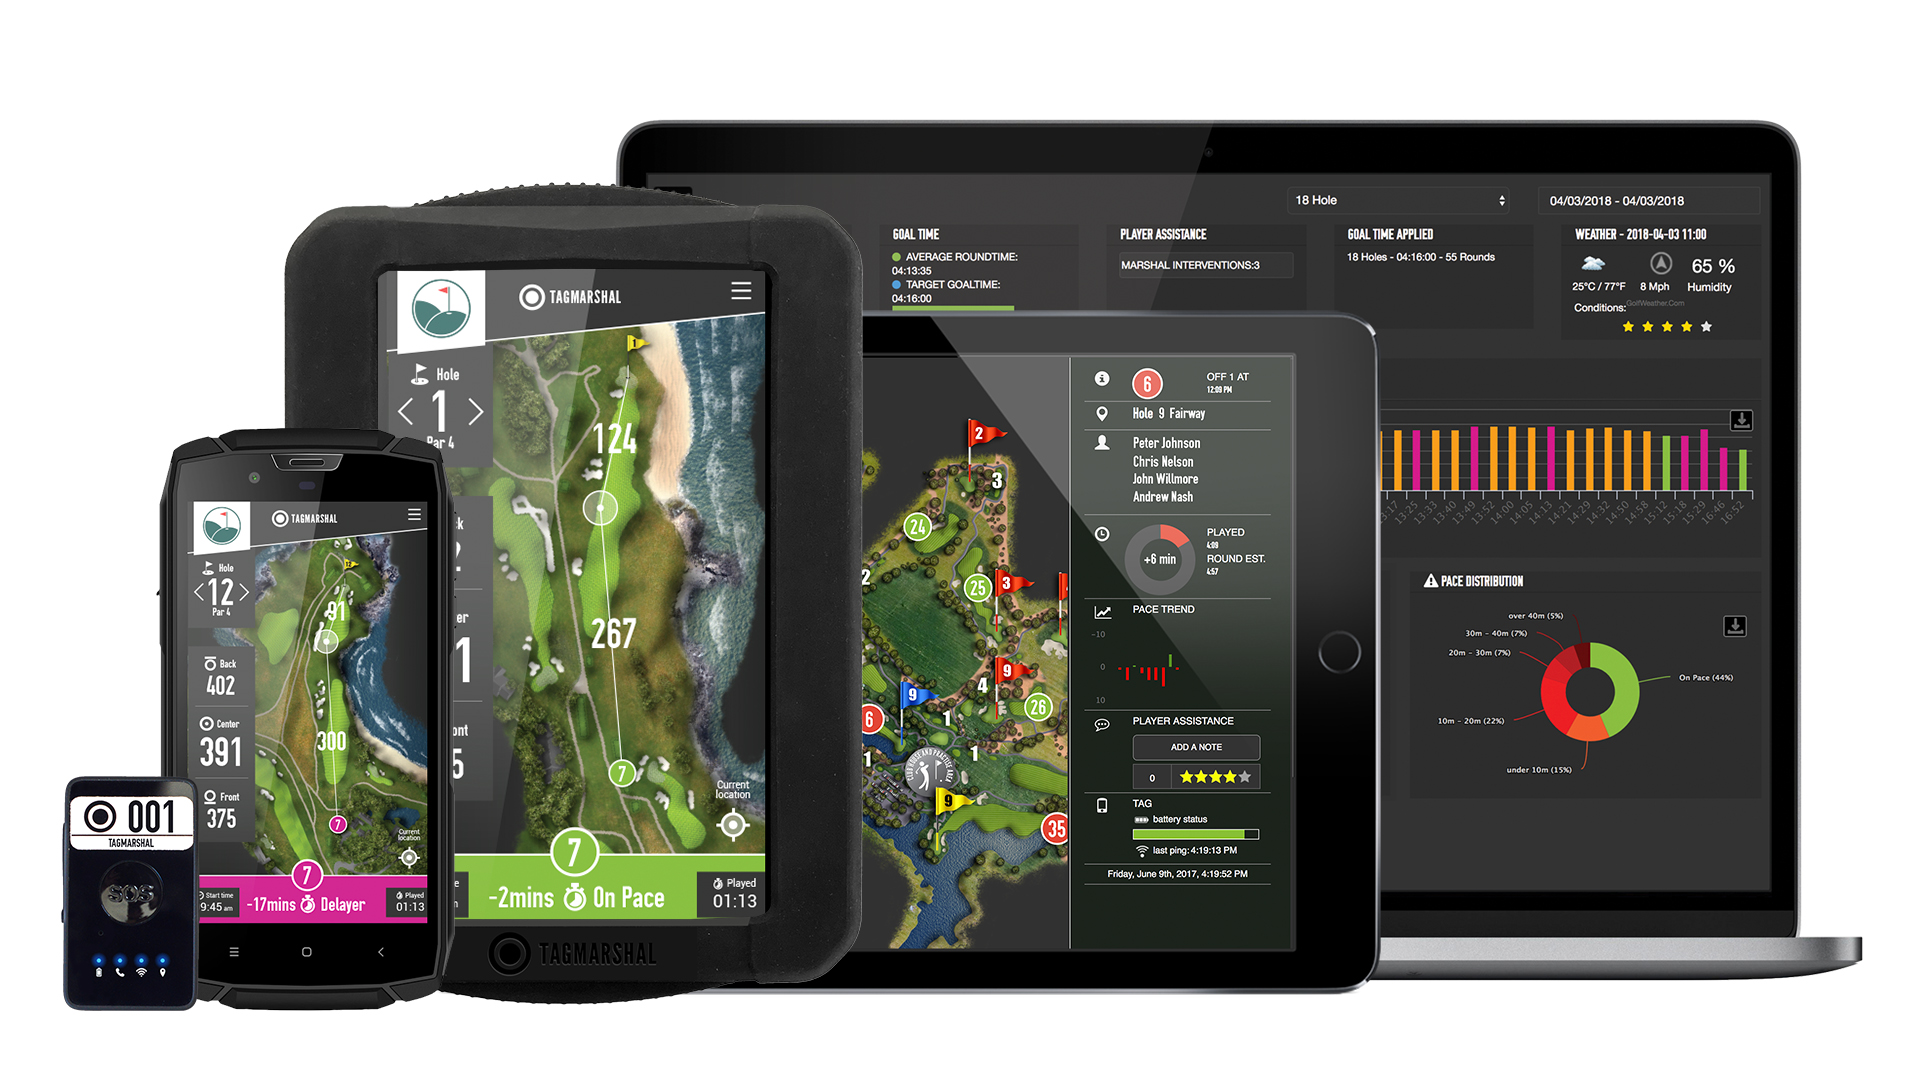 Tagmarshal provides detailed data to enable clubs to discover where and when hold-ups occur on the golf course1